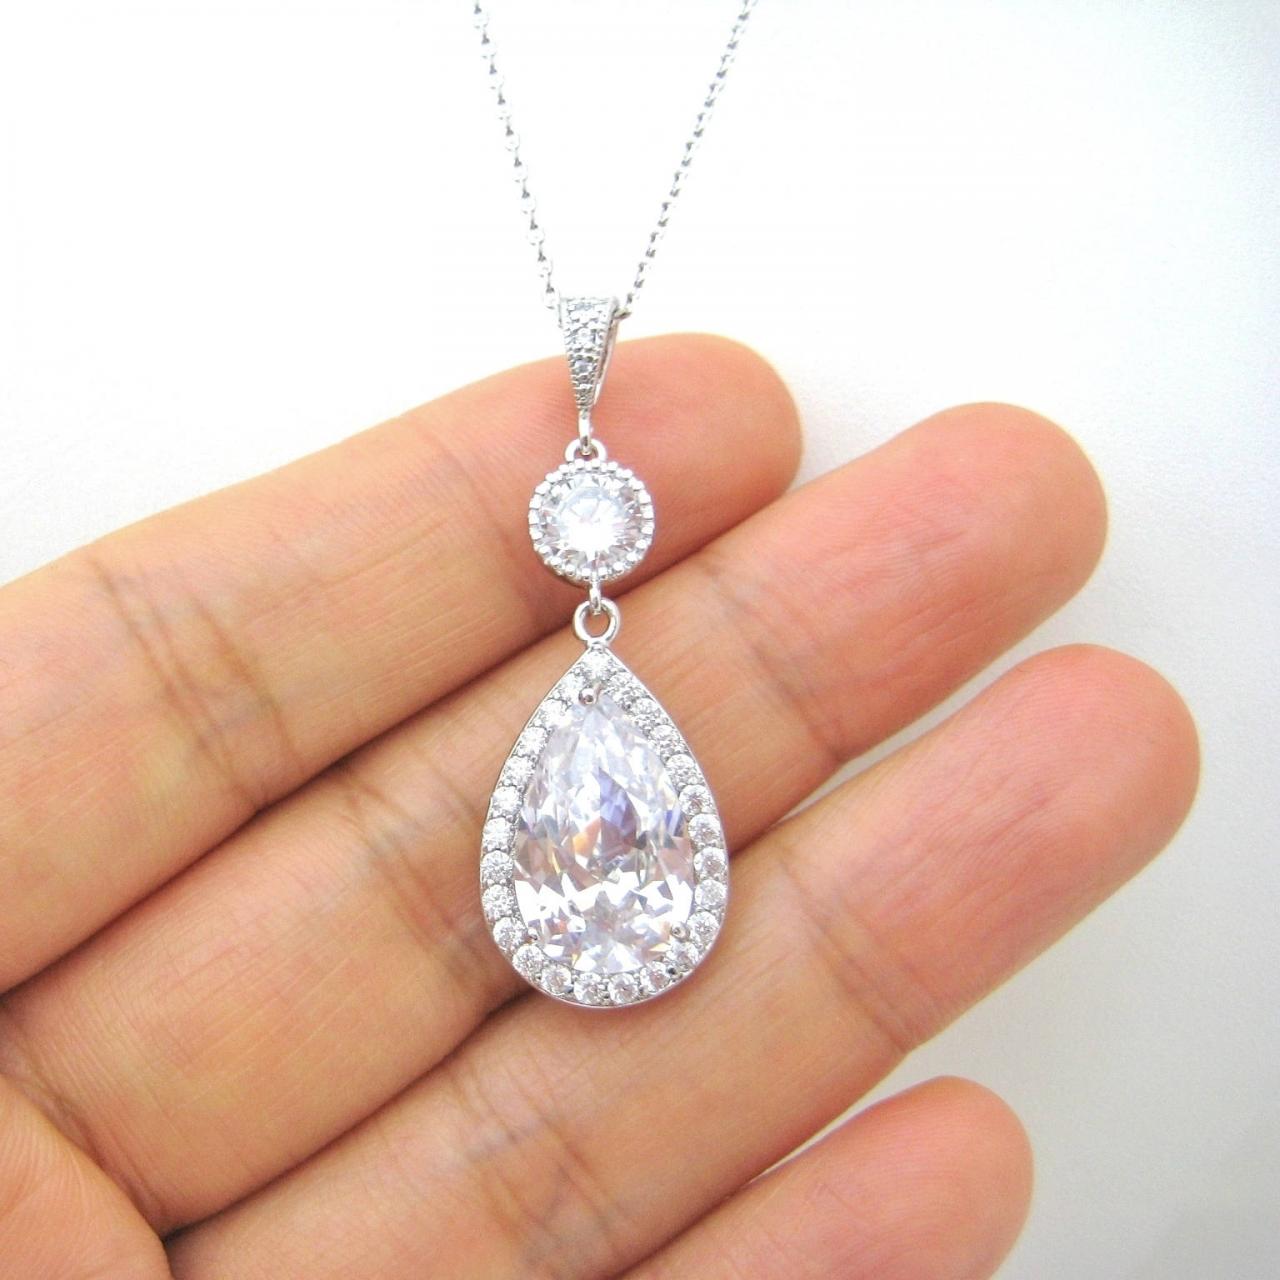 Wedding Necklace Bridal Clear Crystal Necklace Large Cubic Zirconia Teardrop Necklace Bridesmaids Gift Dangle Long Bridal Necklace (n003)